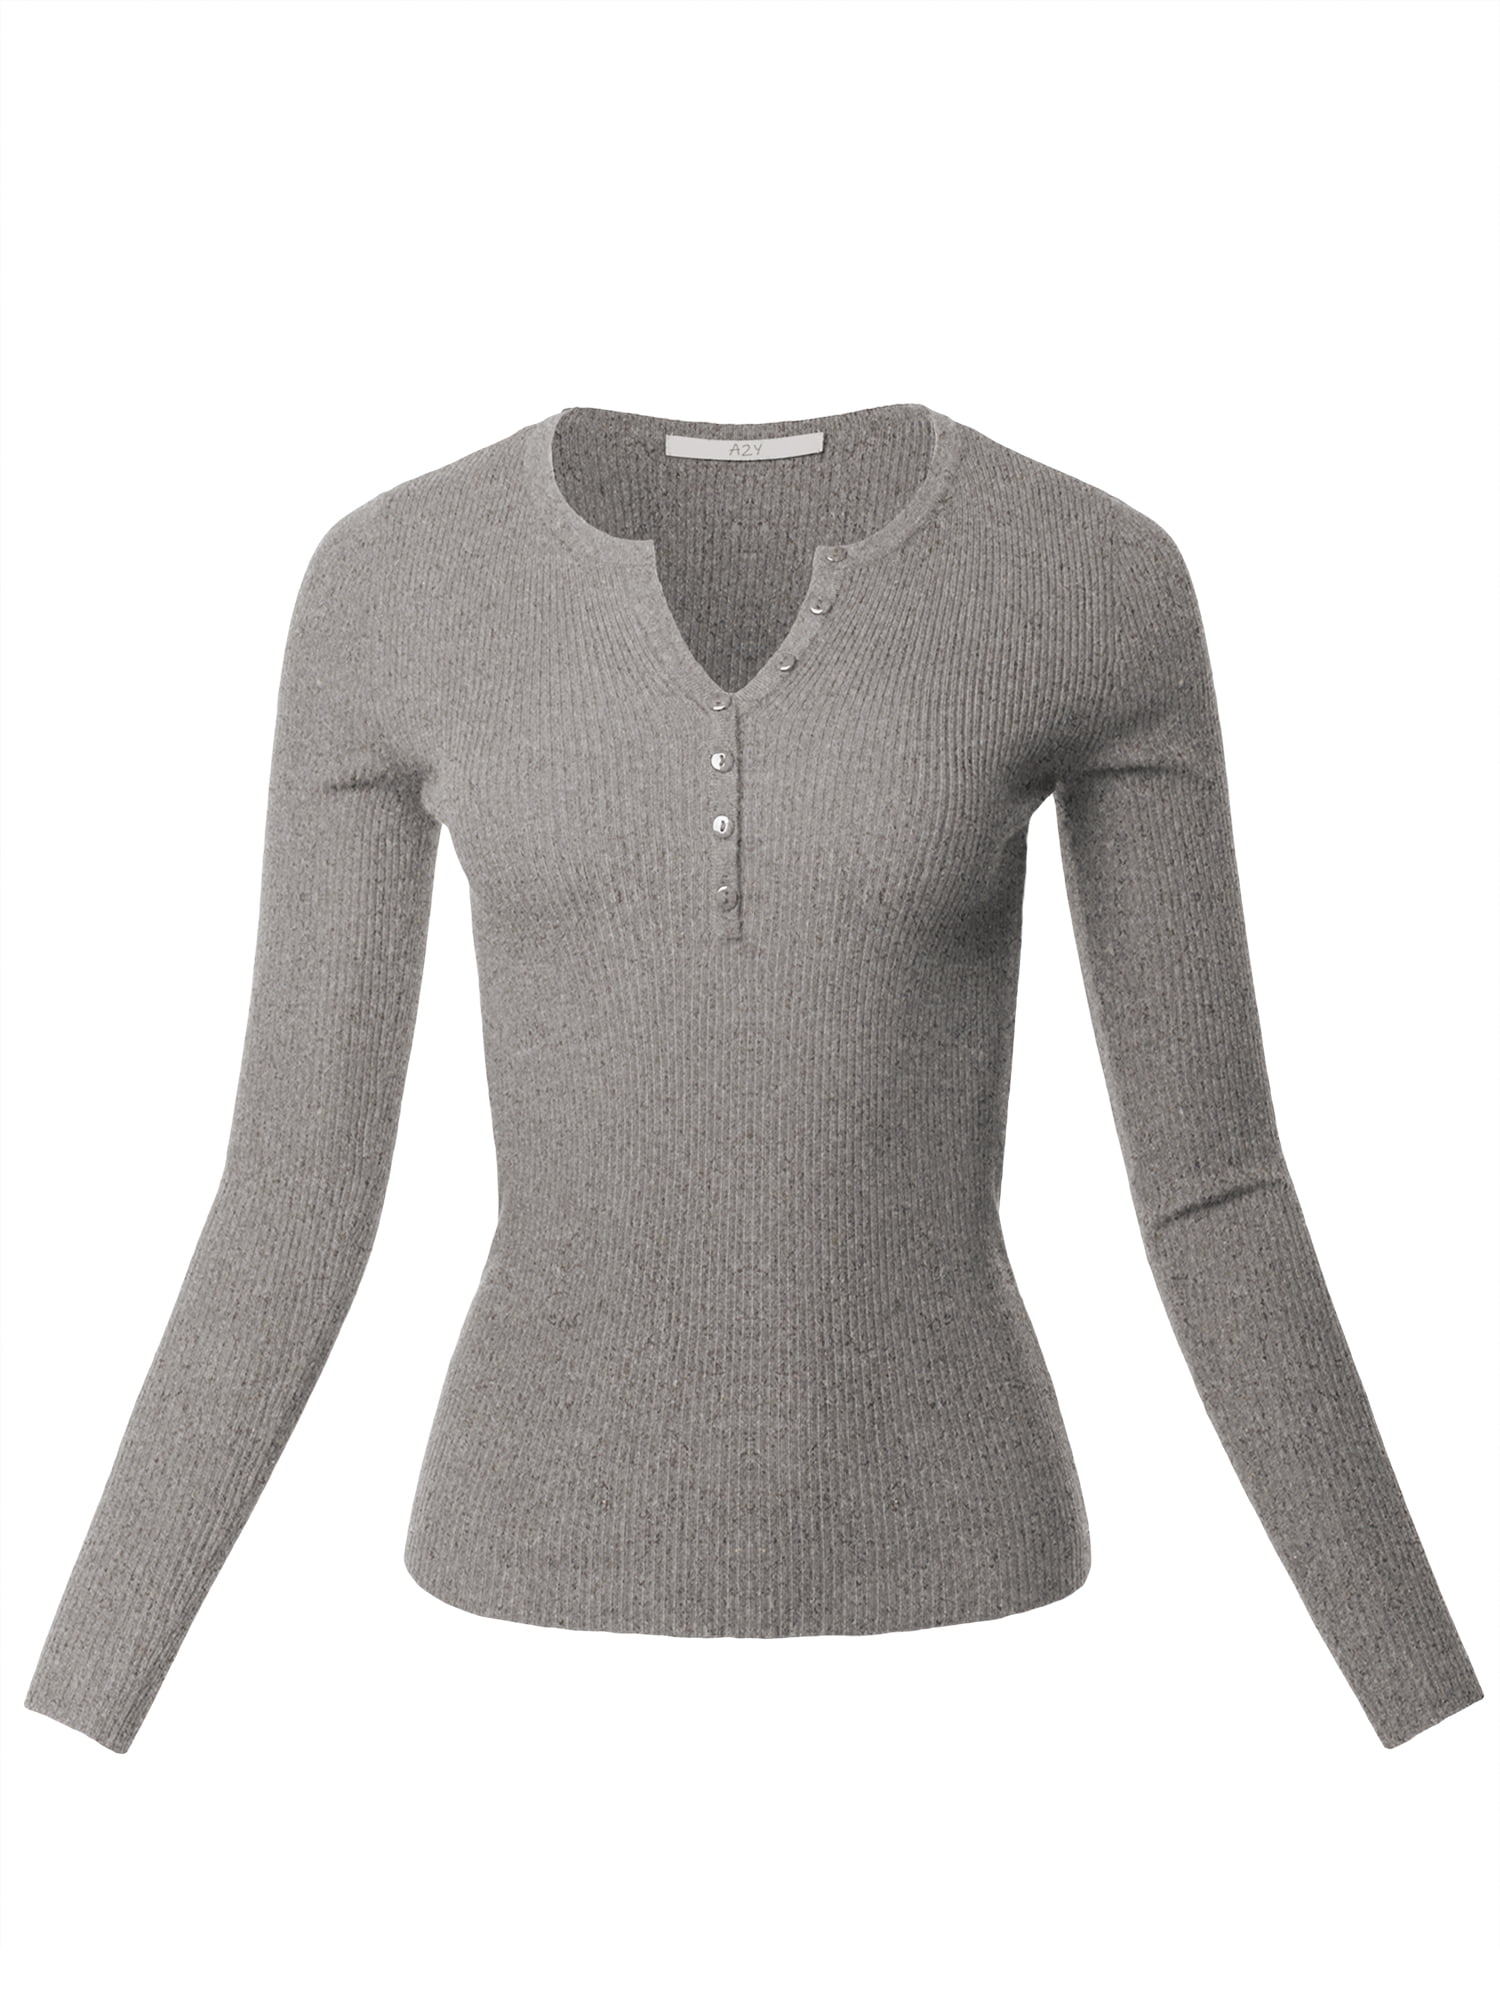 Charter Club Women's Solid Three Button Henley Sweater 